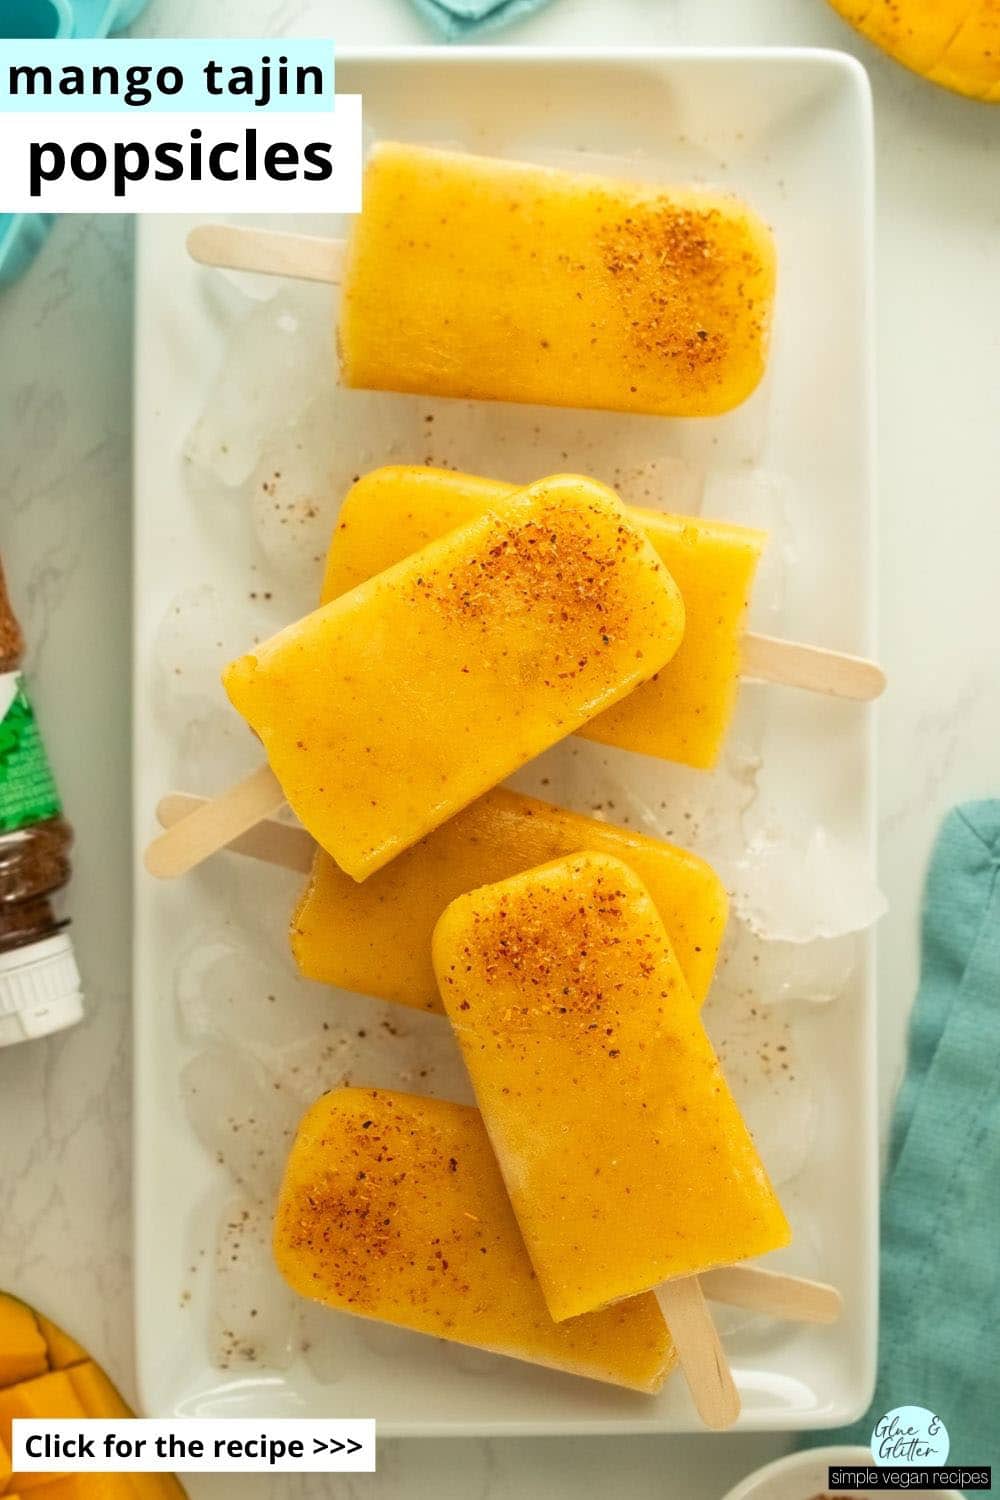 mango tajin popsicles on a serving tray covered in ice, text overlay